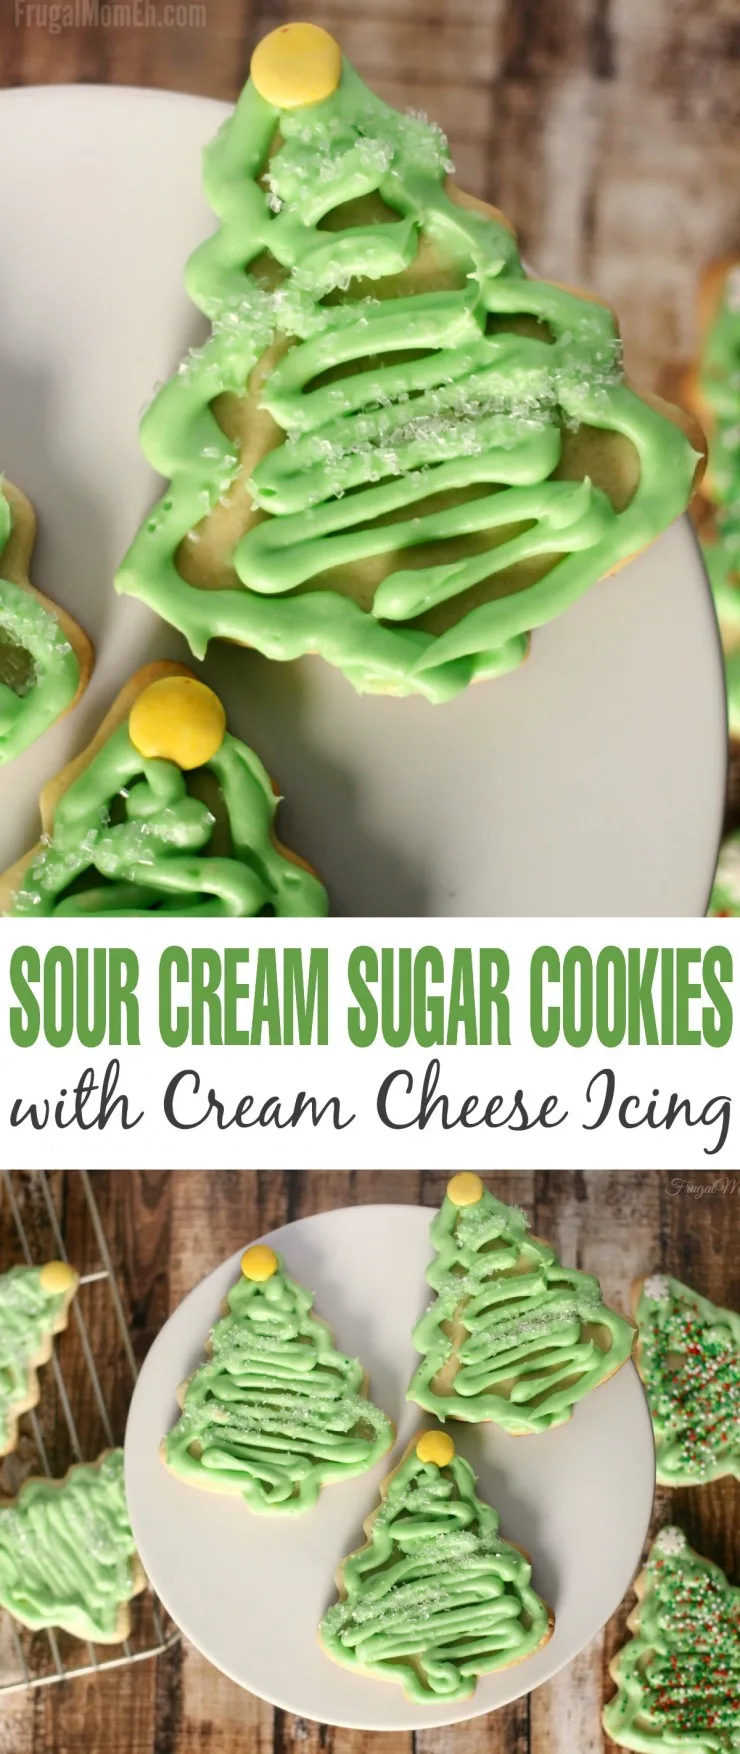 These Sour Cream Sugar Cookies with Cream Cheese Icing are an amazing Christmas dessert idea when paired with Christmas tree cookie cutters.